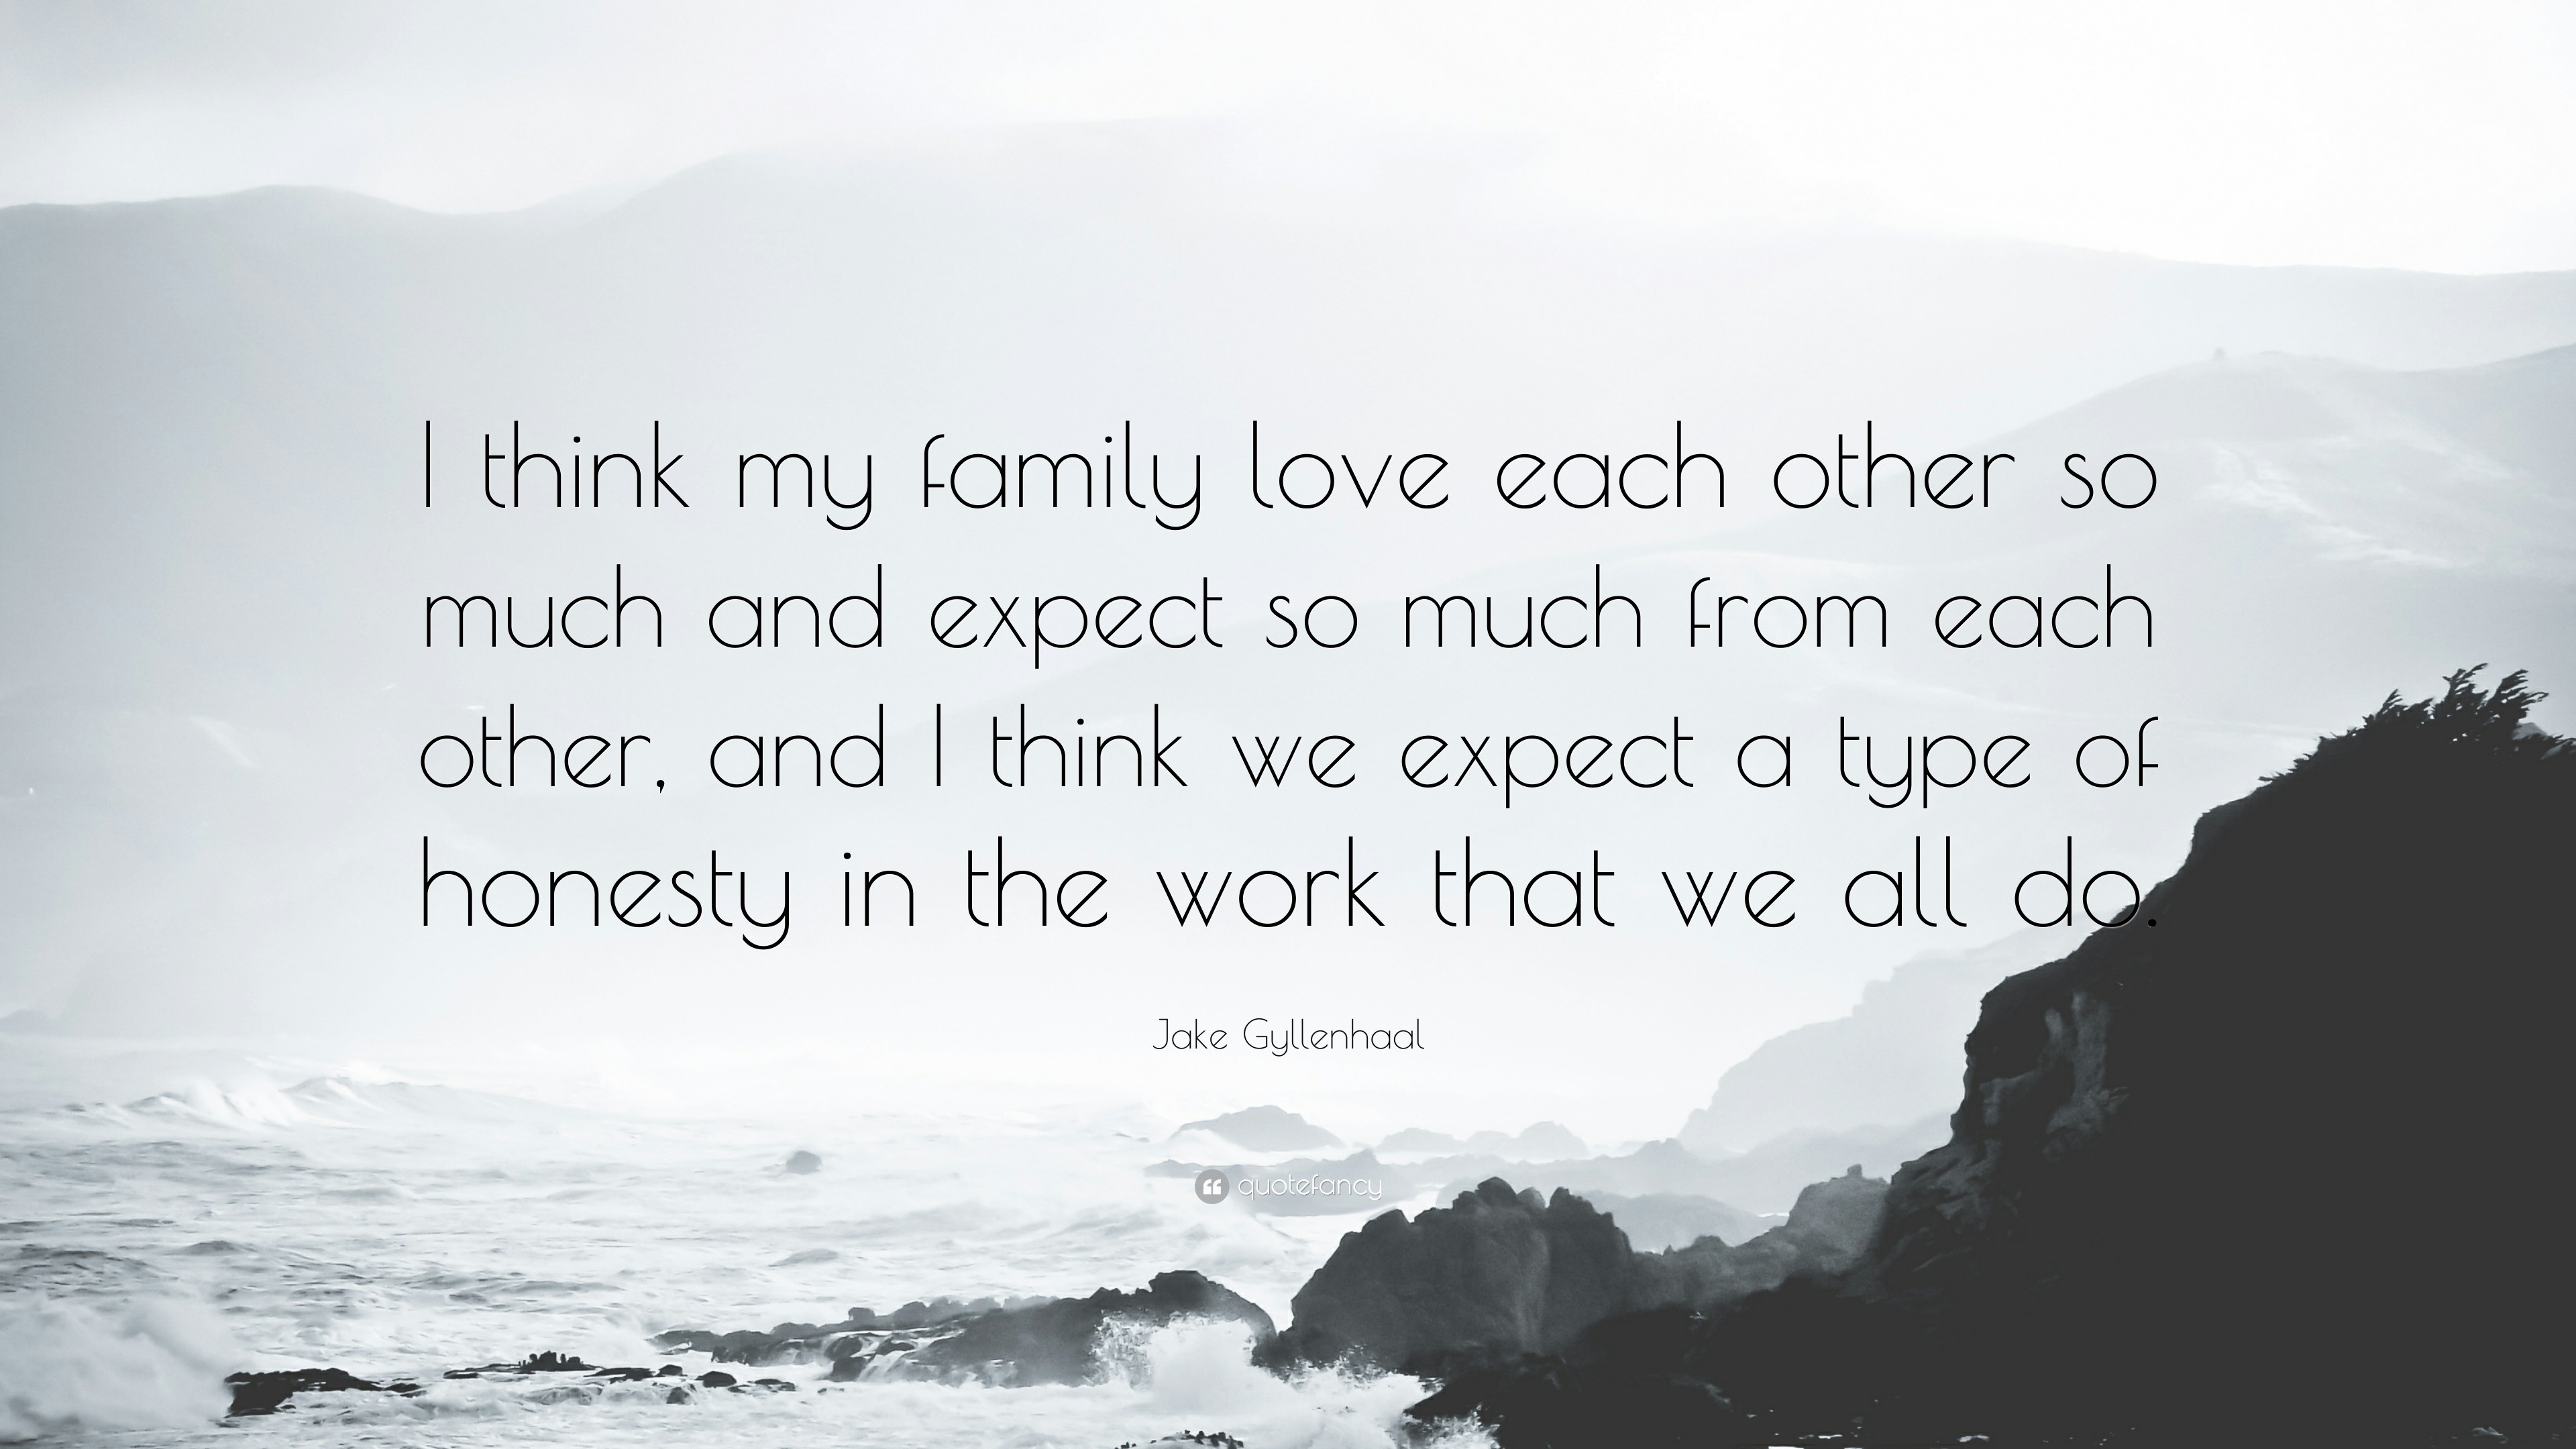 Jake Gyllenhaal Quote “I think my family love each other so much and expect